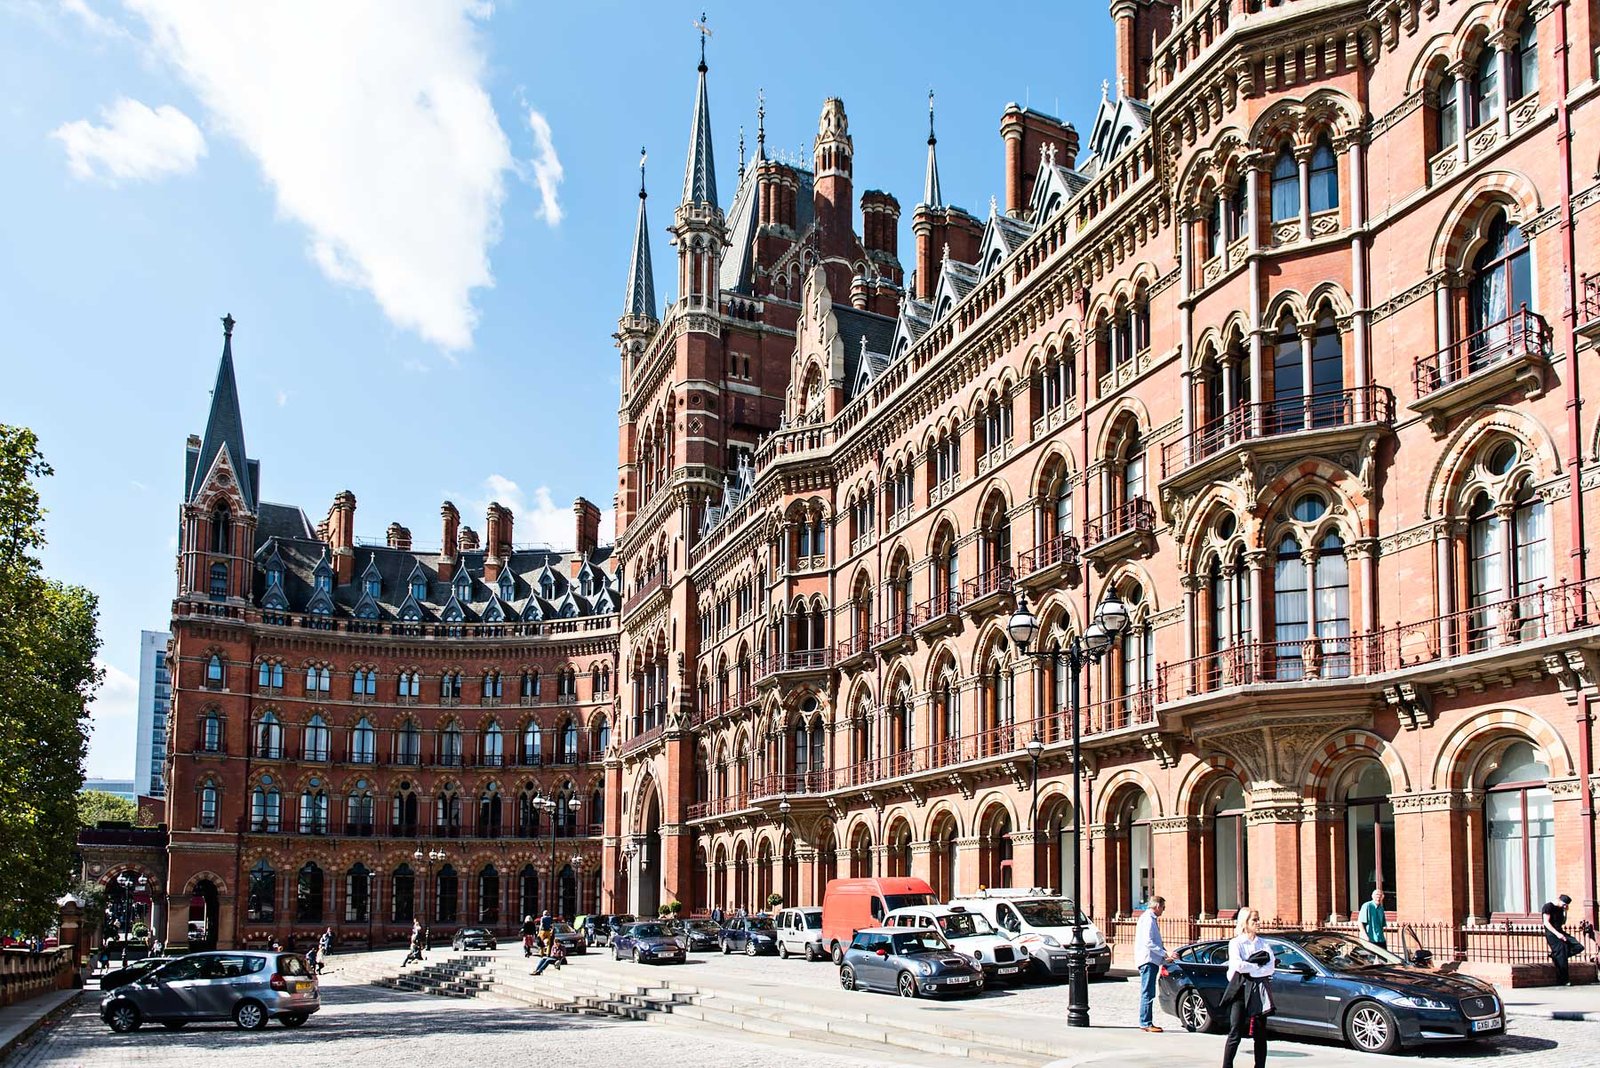 A tour inside St Pancras Chambers apartments as part of Open House London weekend